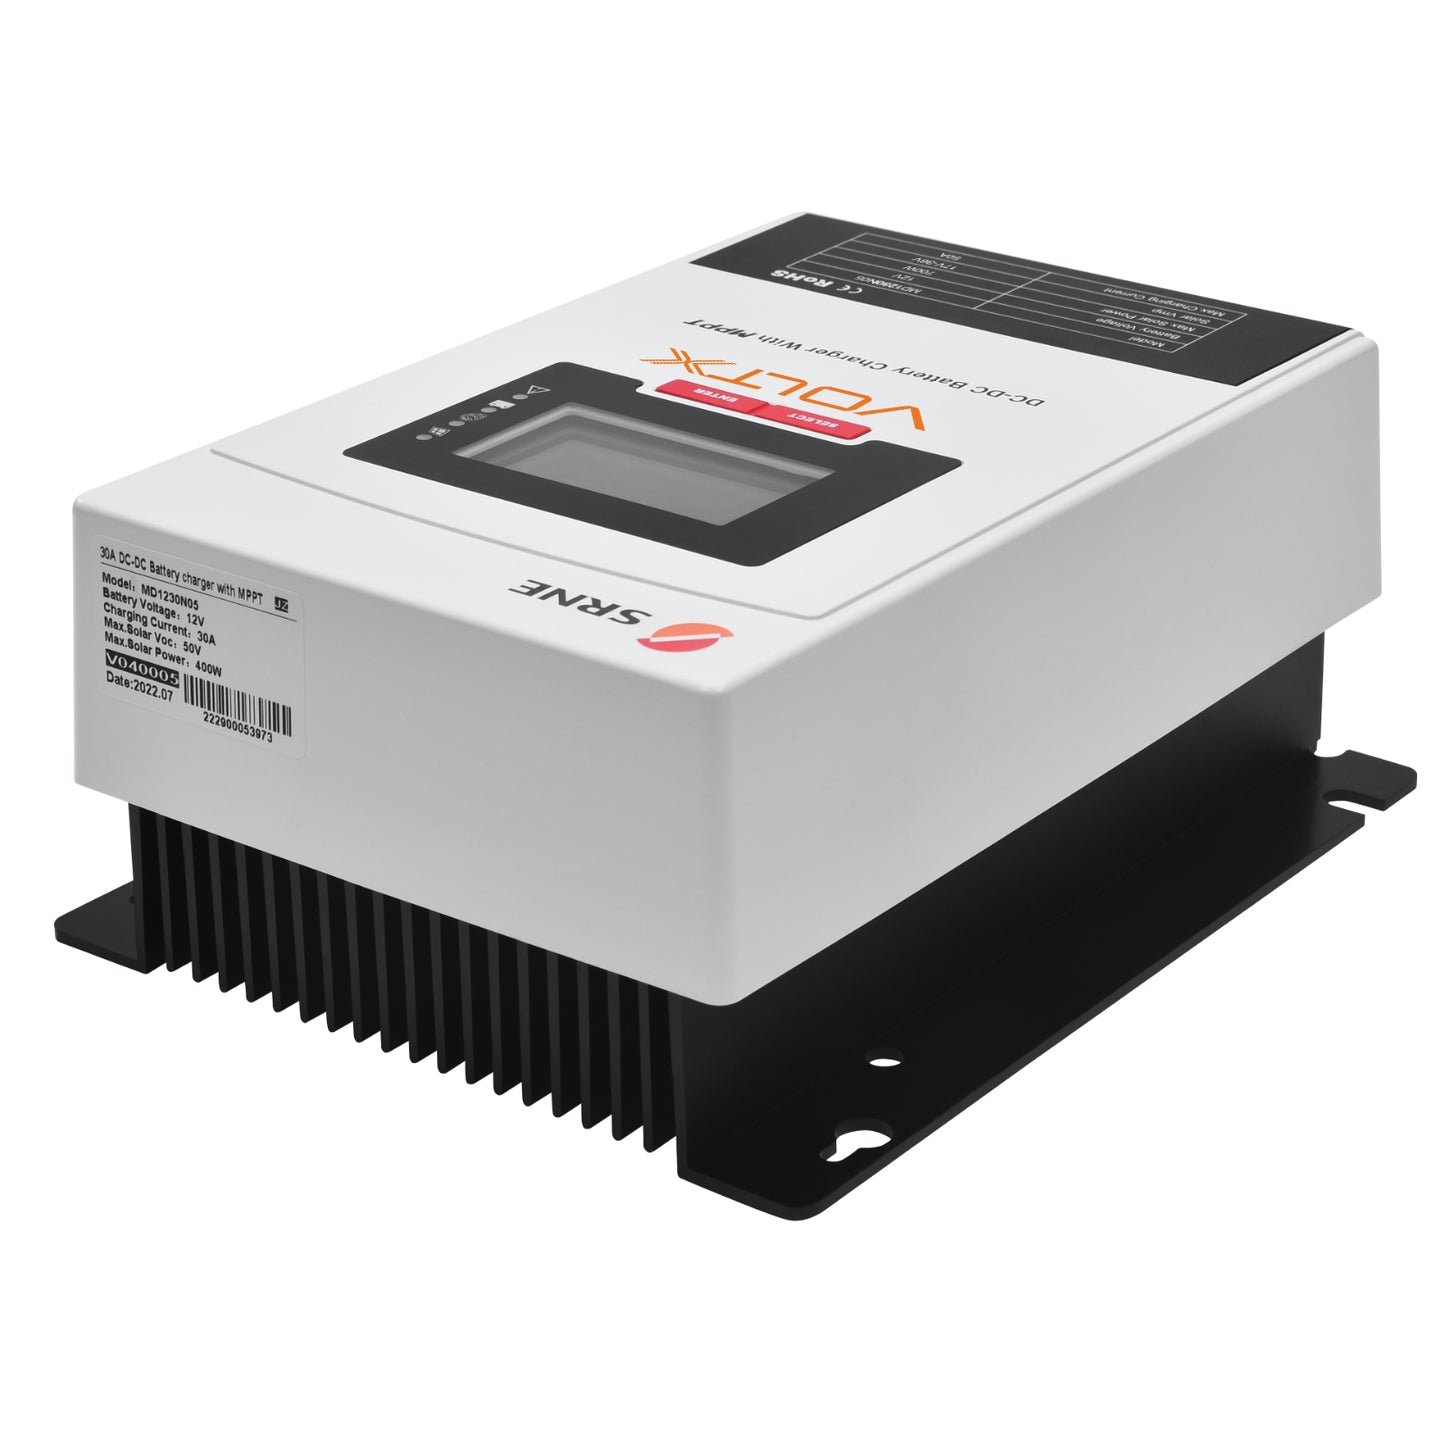 VoltX 50A MPPT DC to DC Lithium Battery Charger